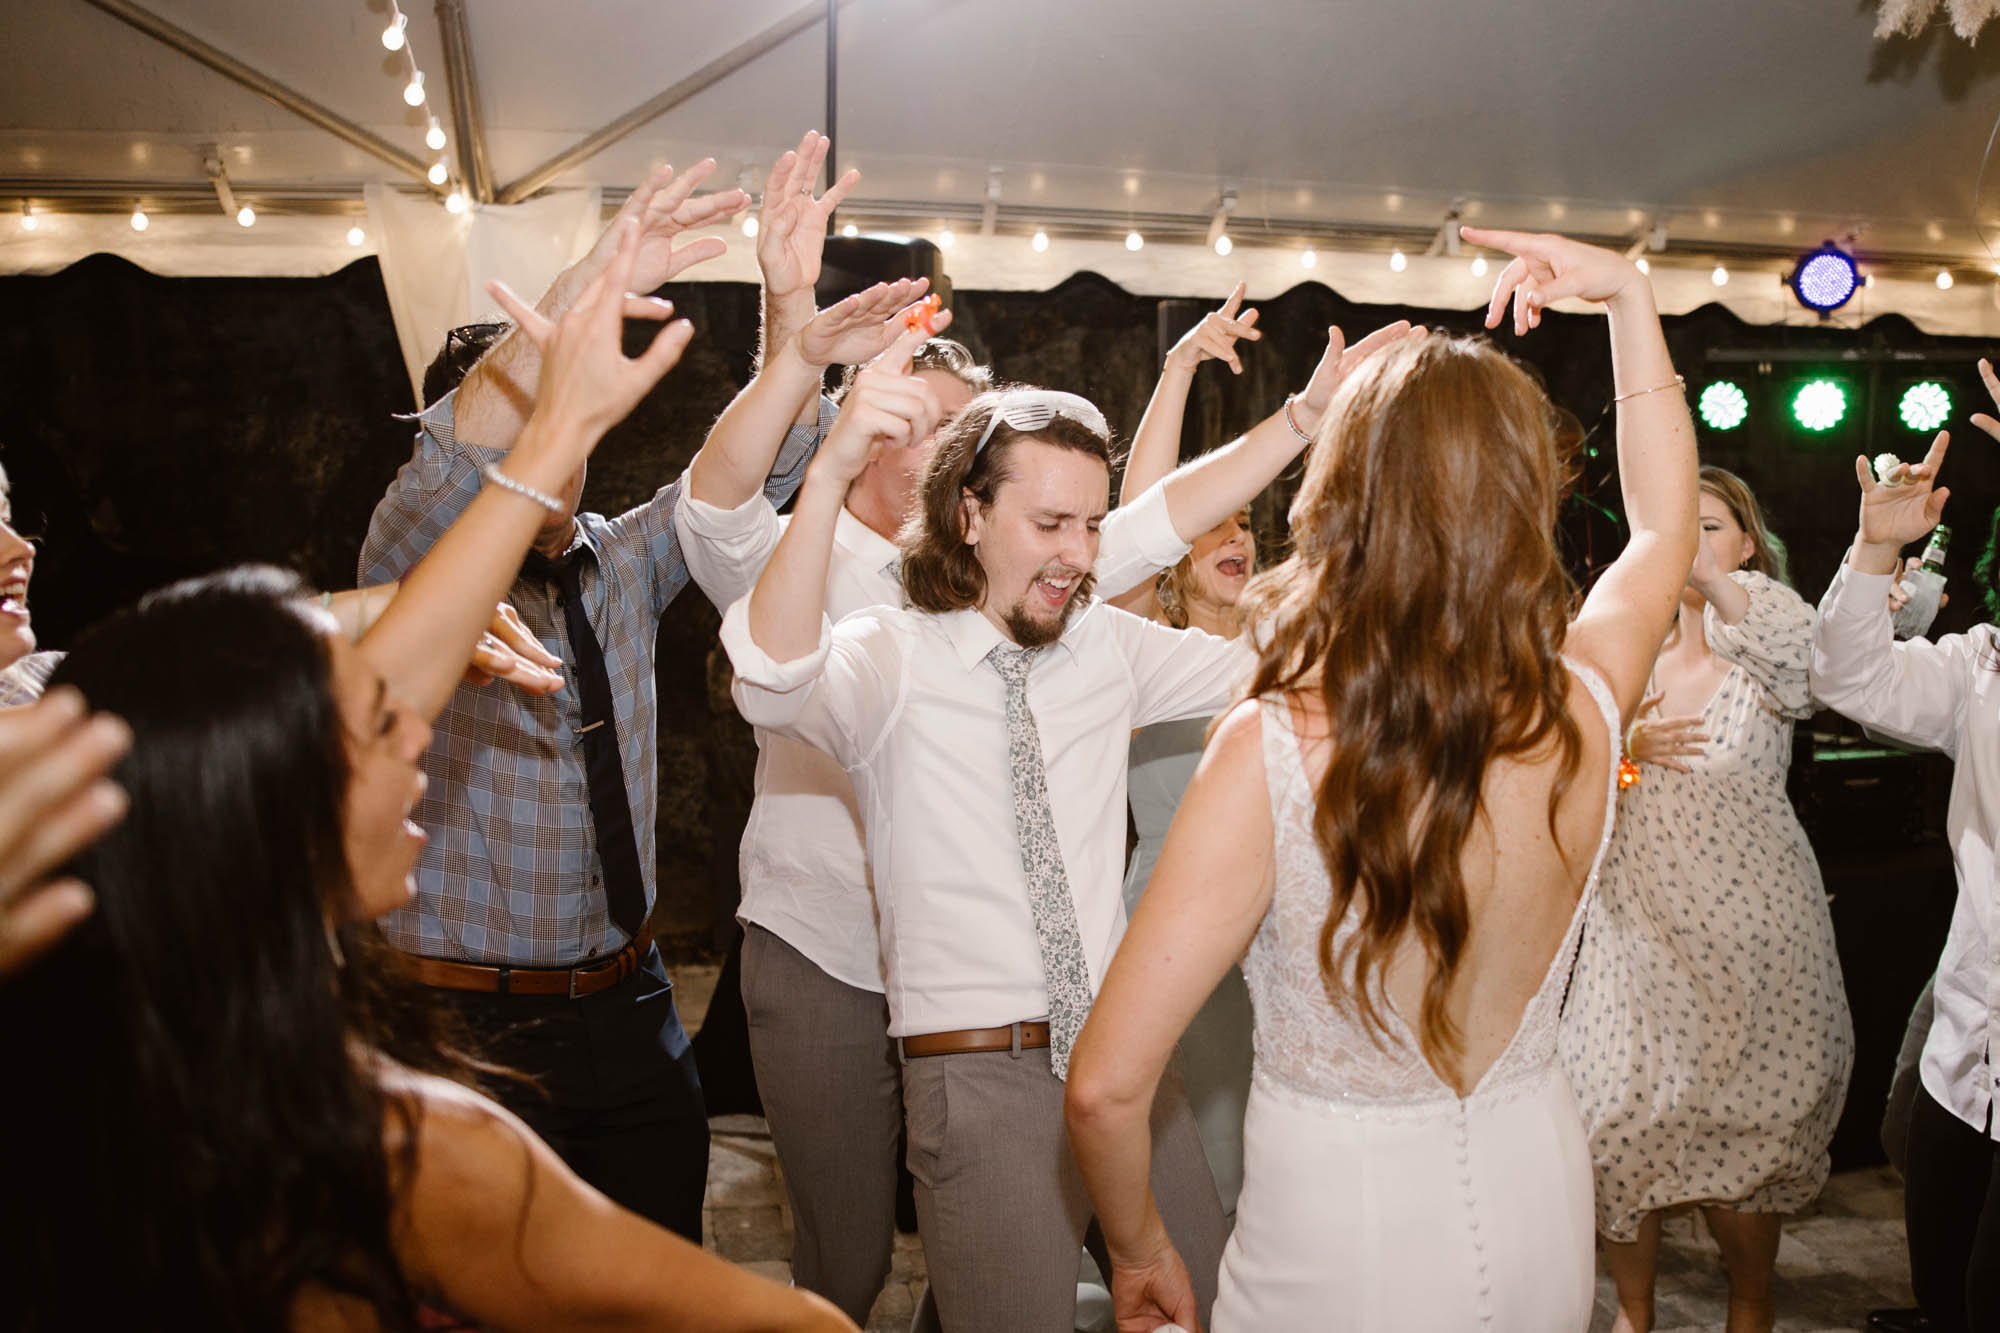 10 Tips For a Successful Wedding Reception